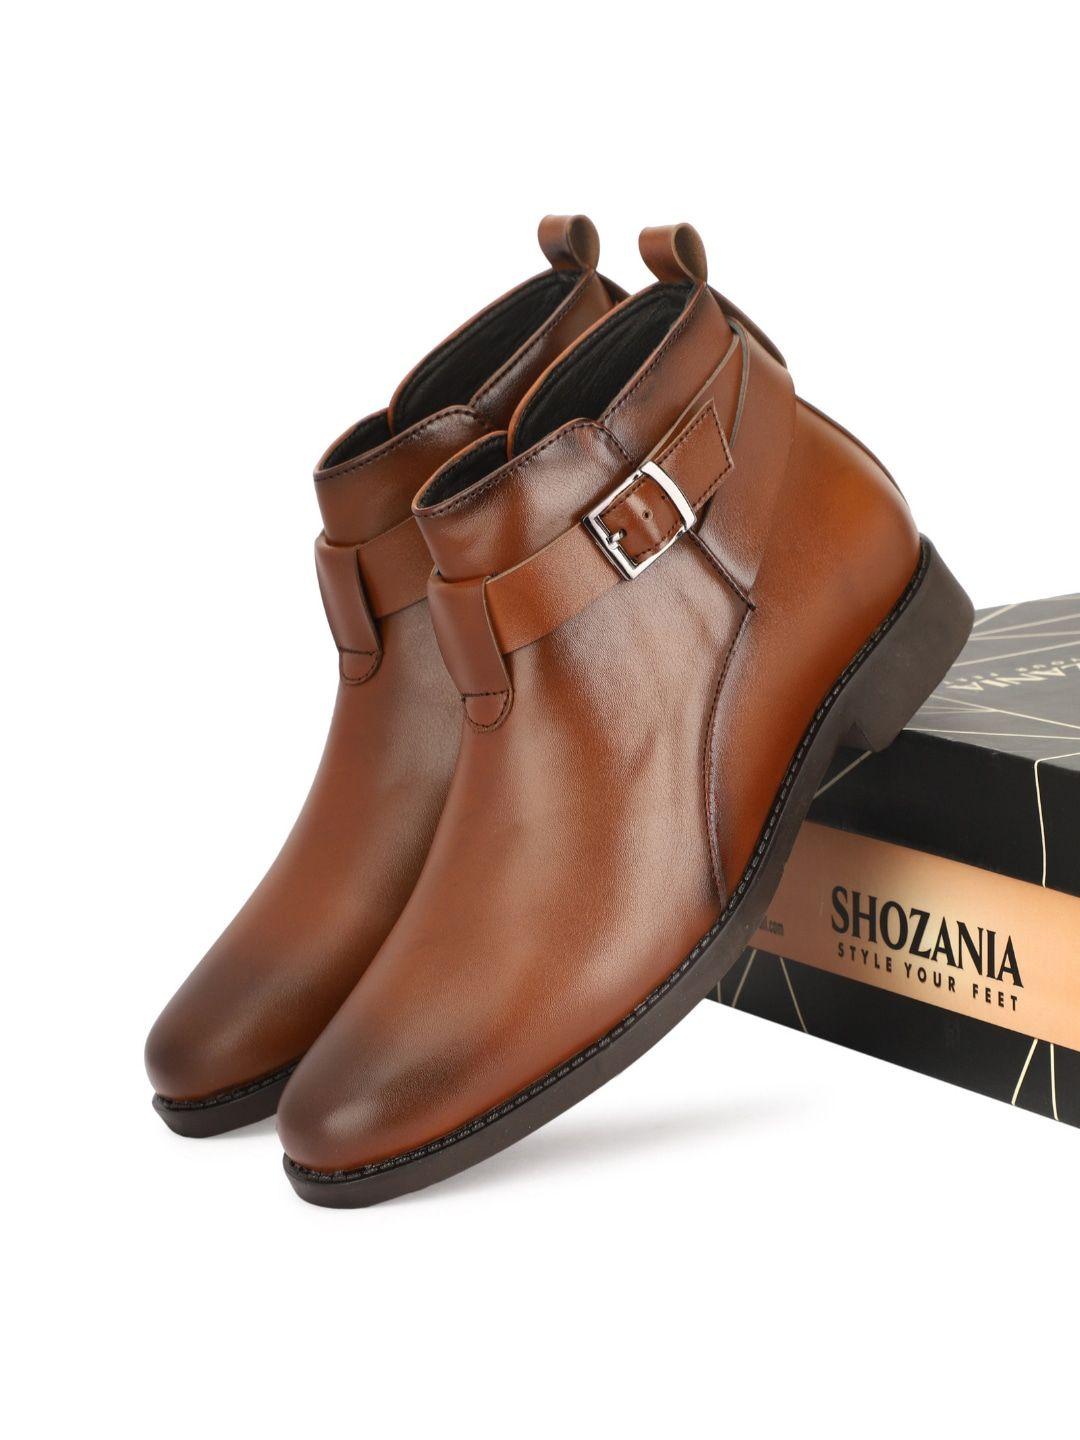 shozania men mid top leather chelsea boots with buckle detail